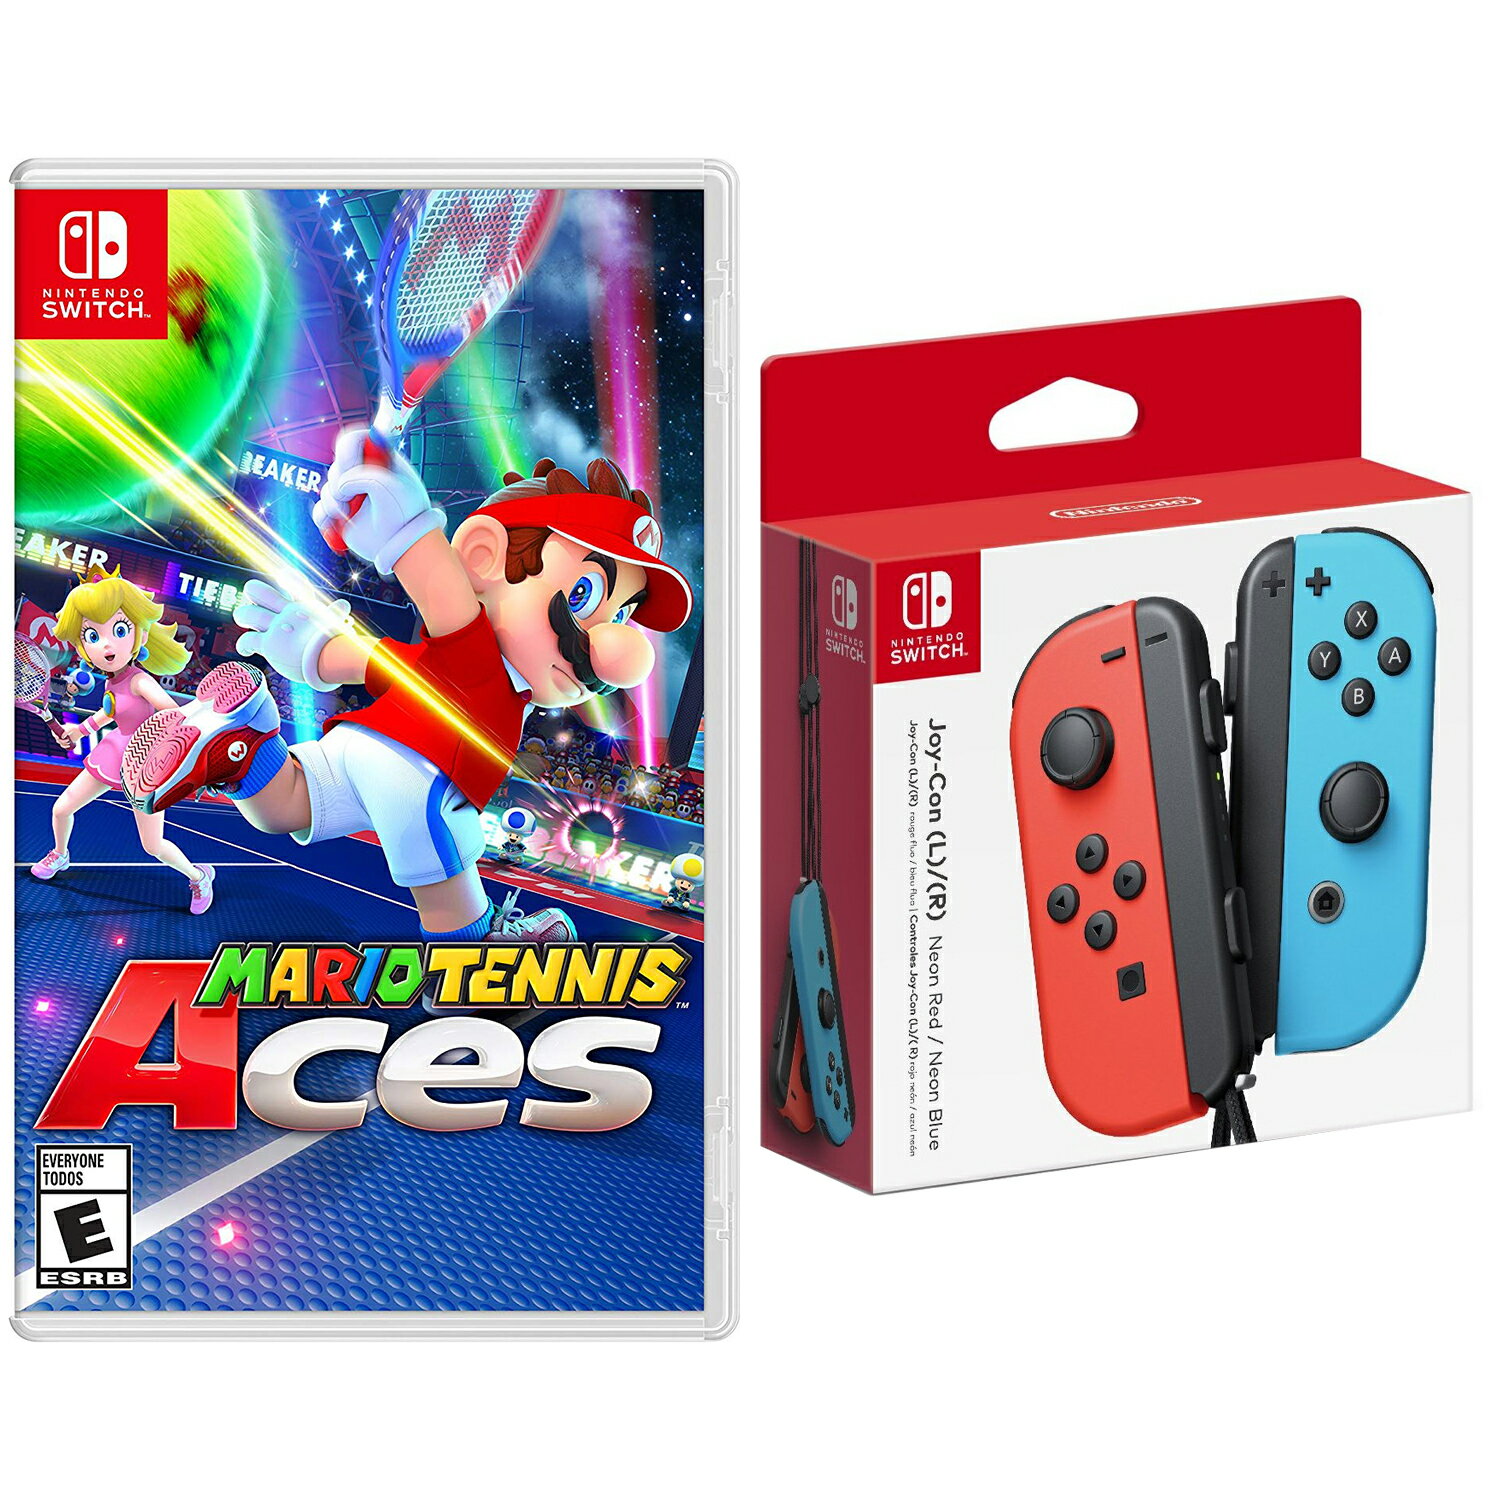 Nintendo Switch Super Mario Tennis Aces Neon Red And Blue Joy Con Controllers